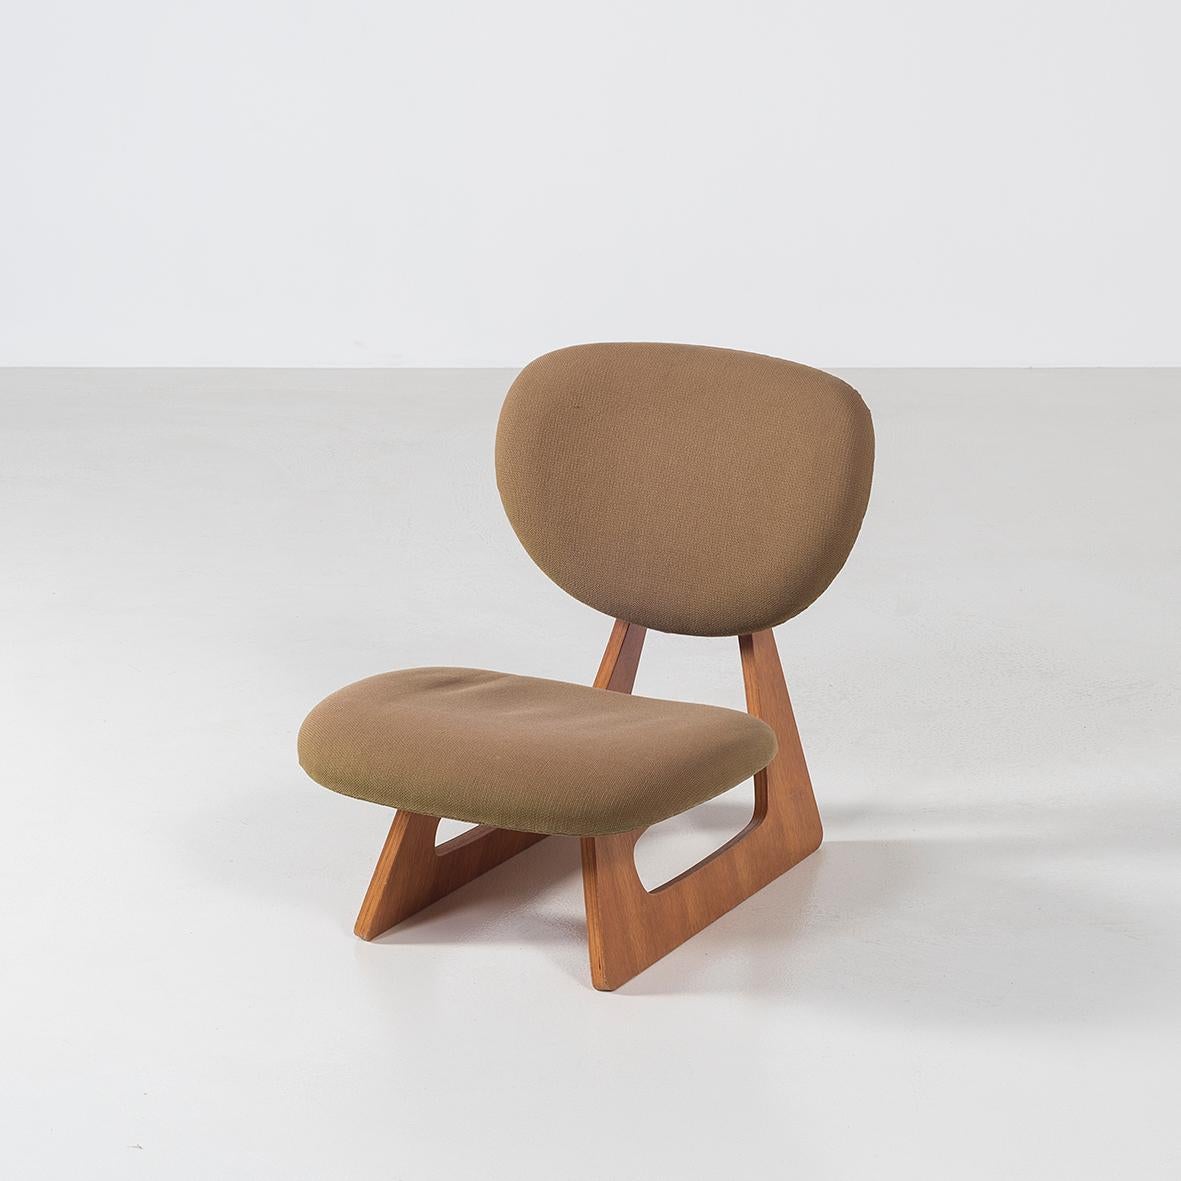 Pair of ‘Teiza Isu' lounge chairs by Junzo Sakakura and Daisaku Choh for Tendo Mokko, designed in 1960. 

This chair was designed for the Japanese exhibition booth at the 12th Milano Triennale in 1960. It is the most representative chair of Choh’s